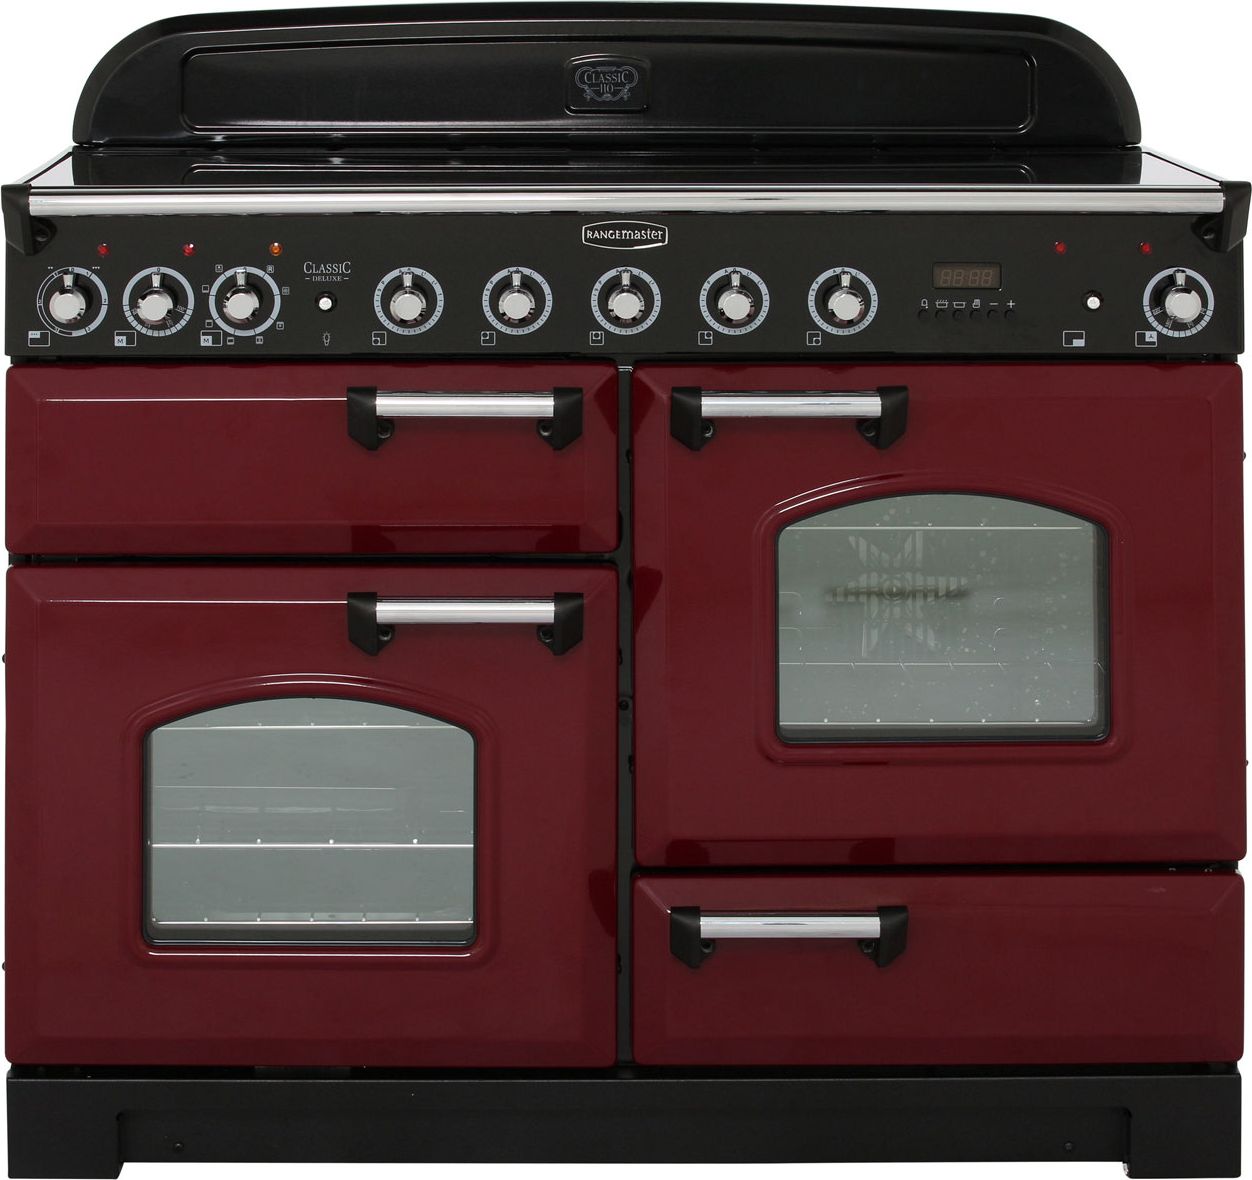 Rangemaster Classic Deluxe CDL110EICY/B 110cm Electric Range Cooker with Induction Hob - Cranberry / Brass - A/A Rated, Red